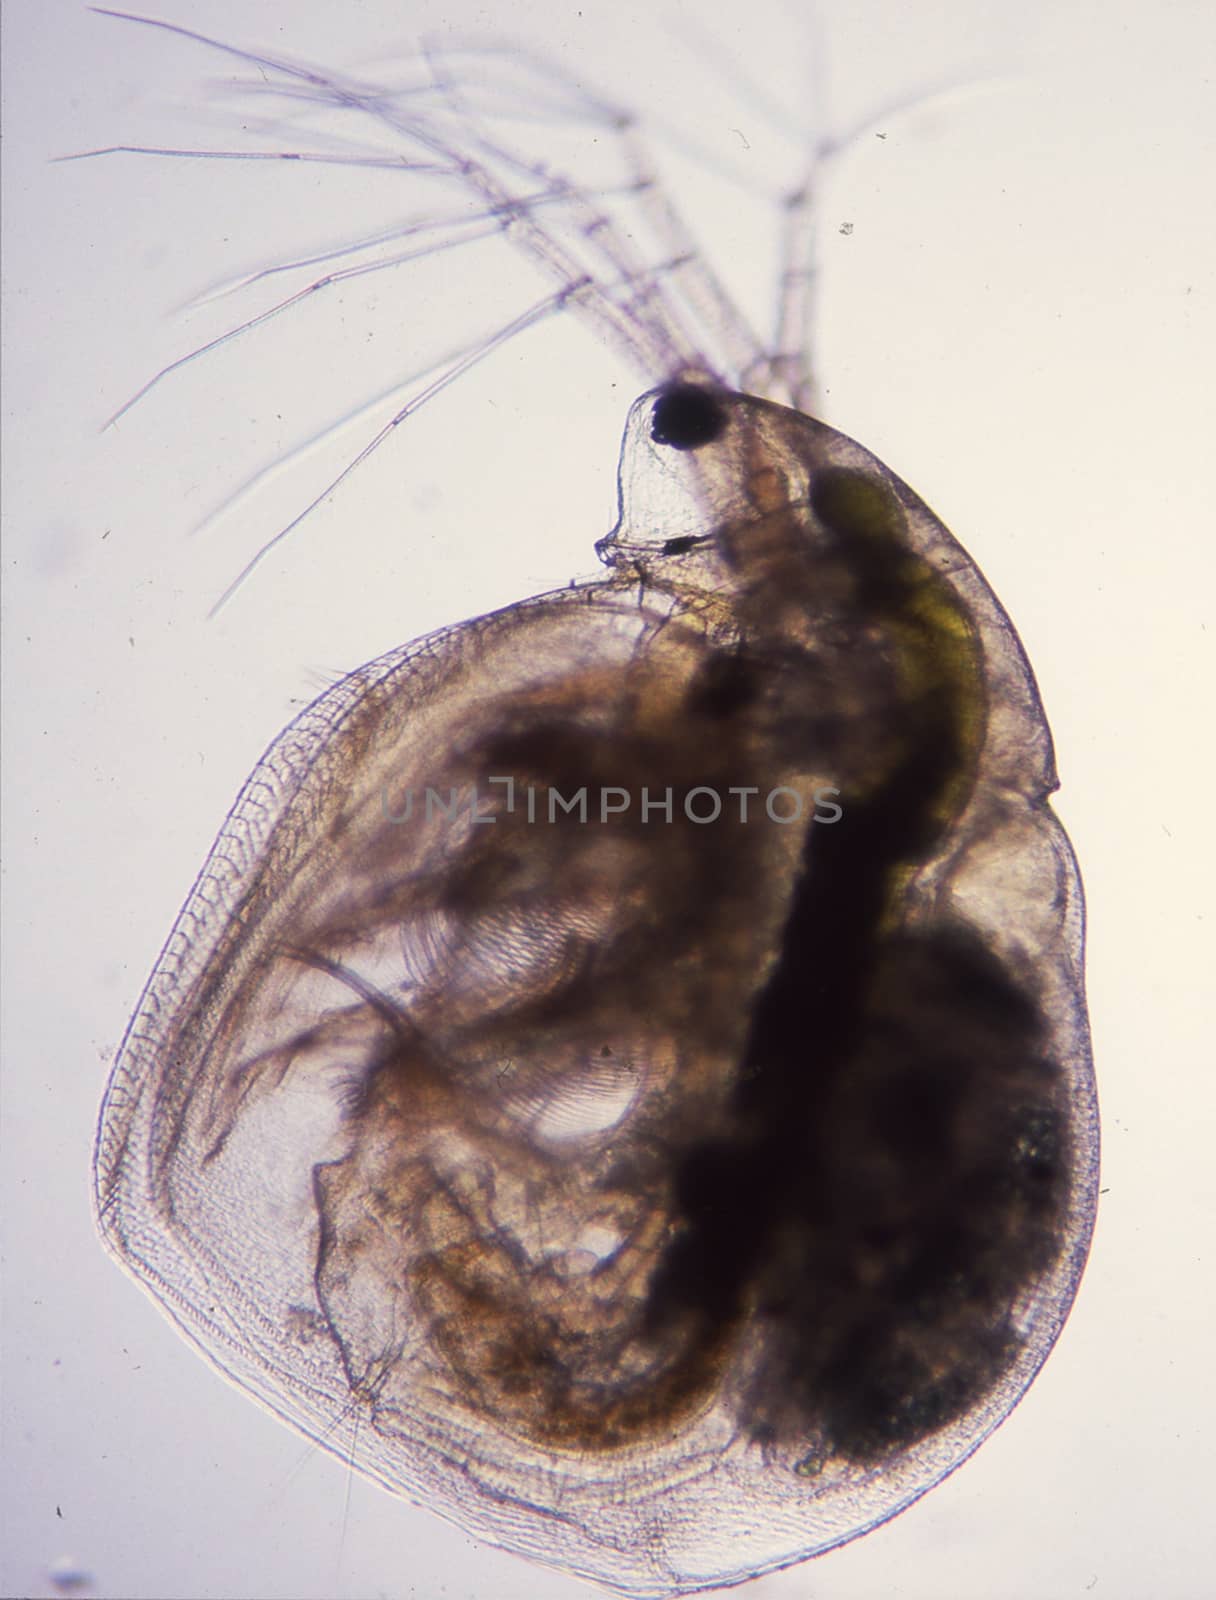 Water flea gives birth to live young 100x by Dr-Lange